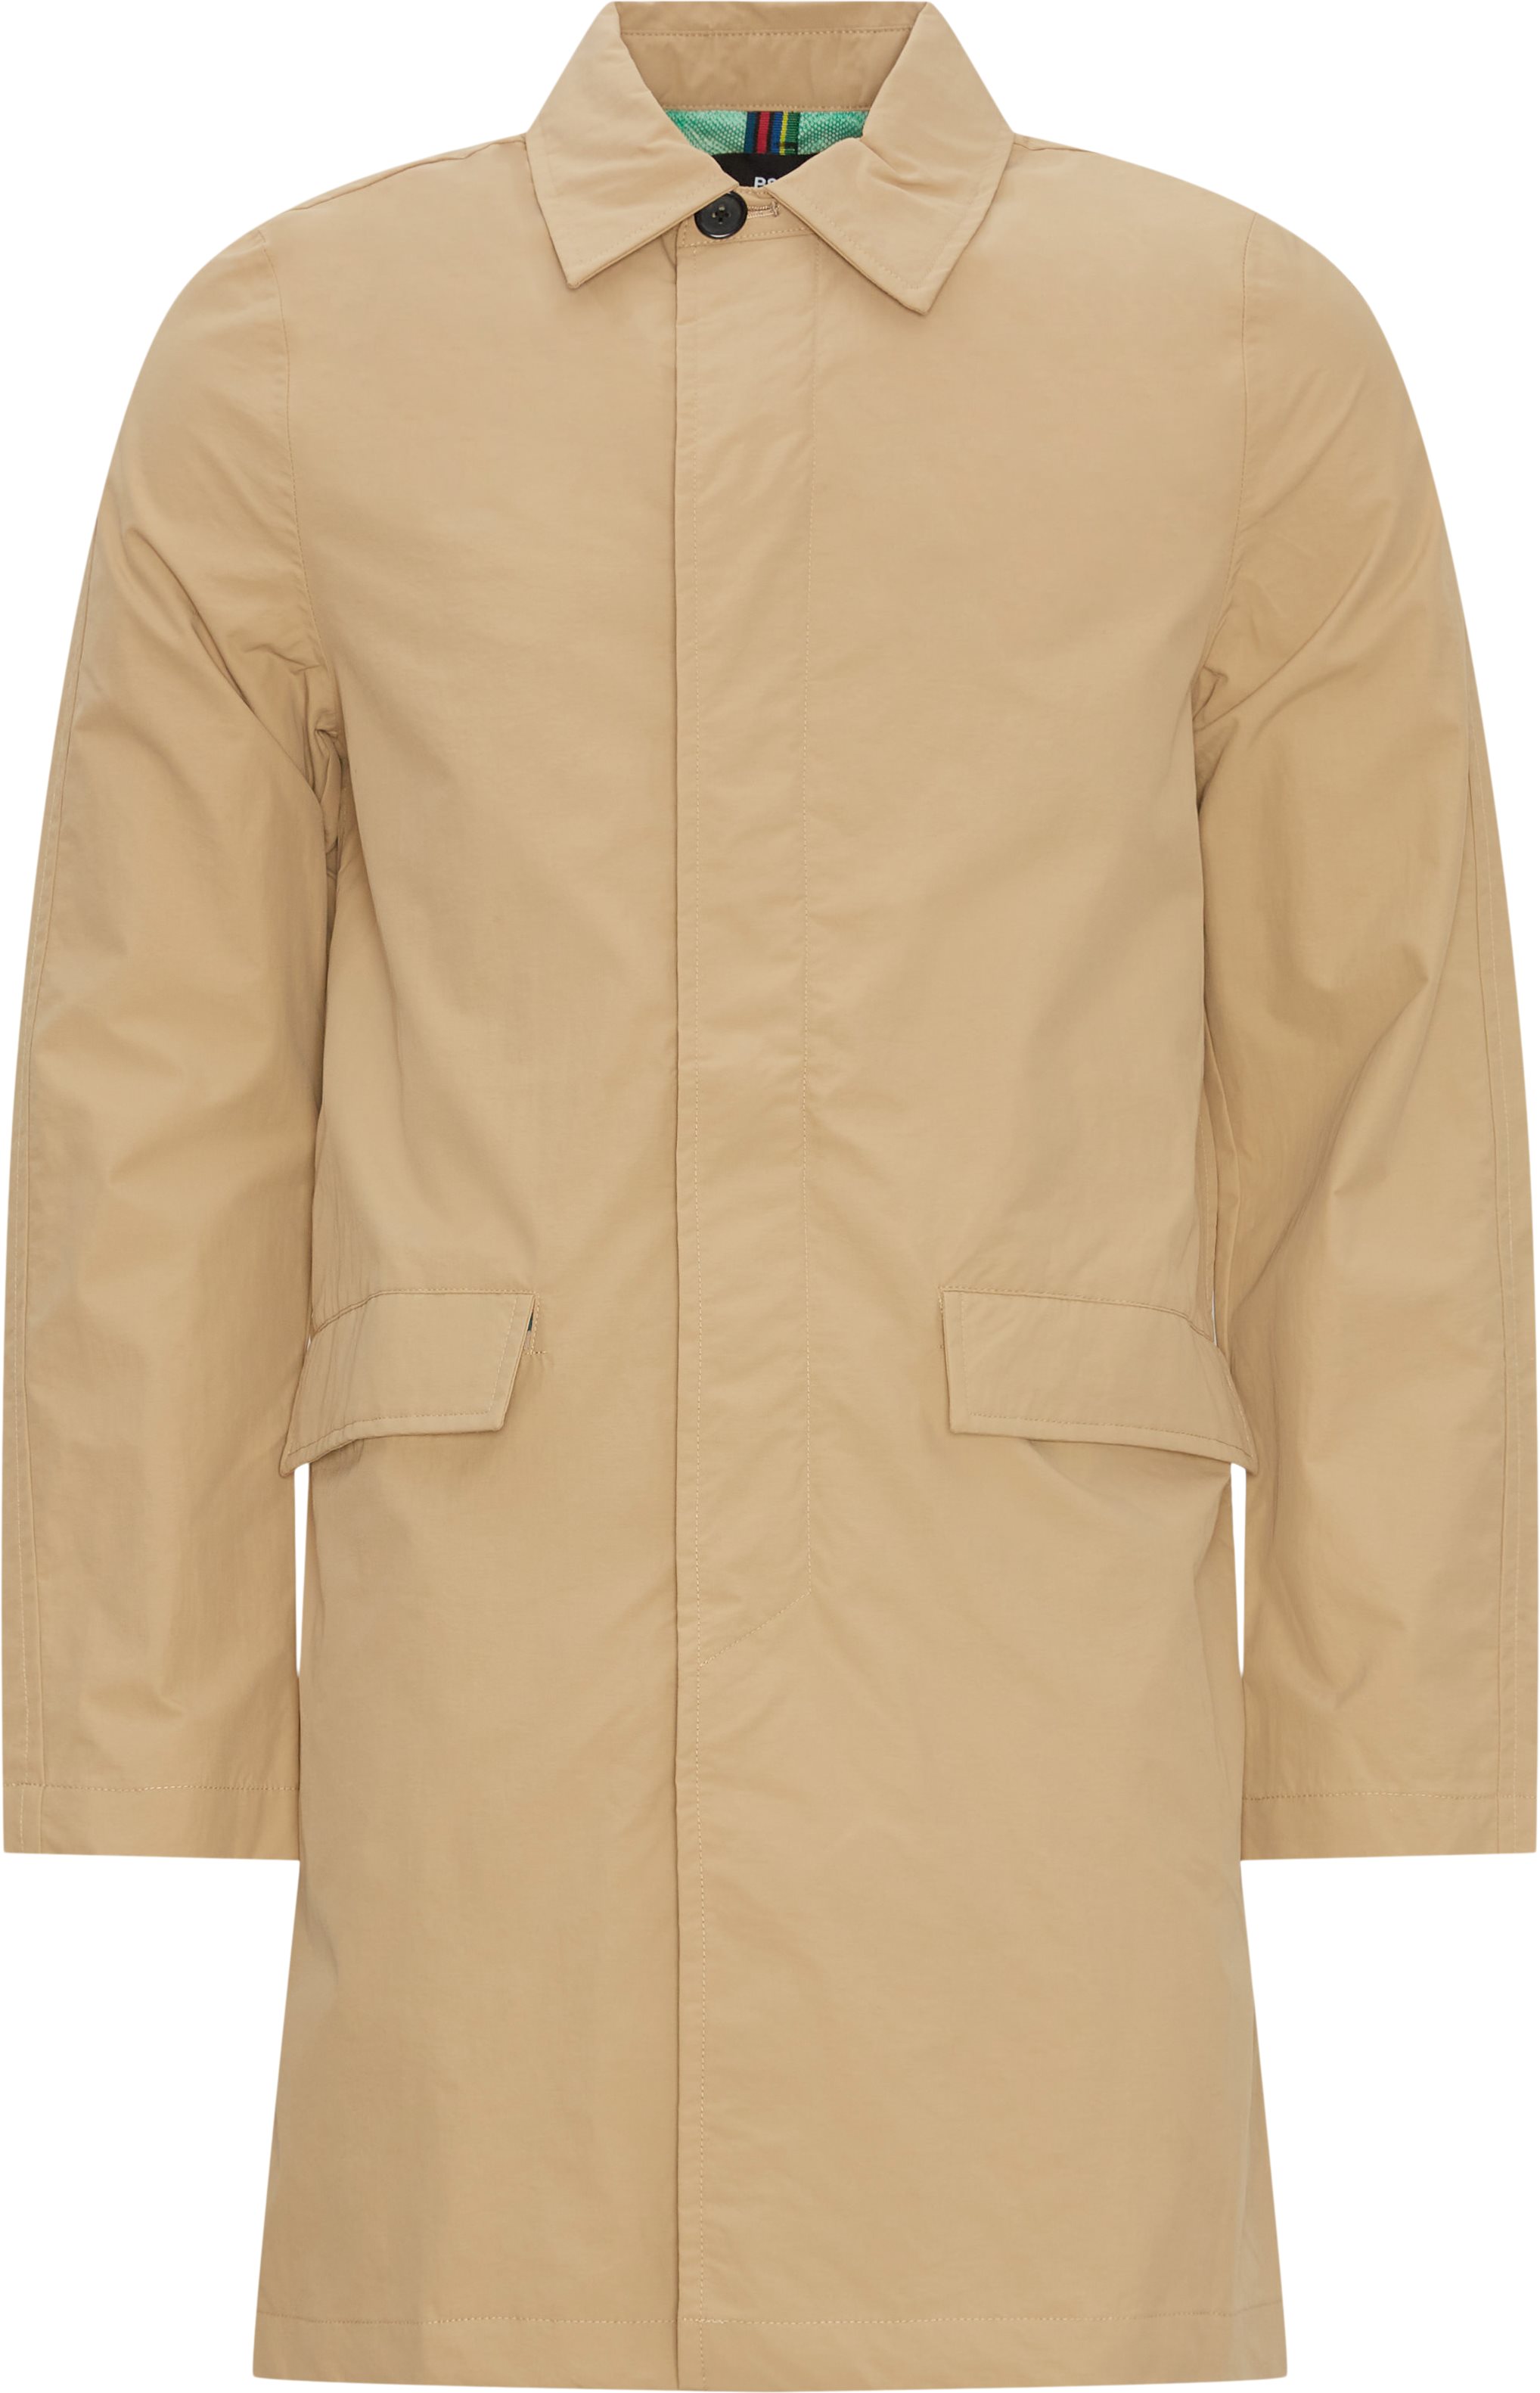 PS Paul Smith Jackets 698Y M21958 Sand